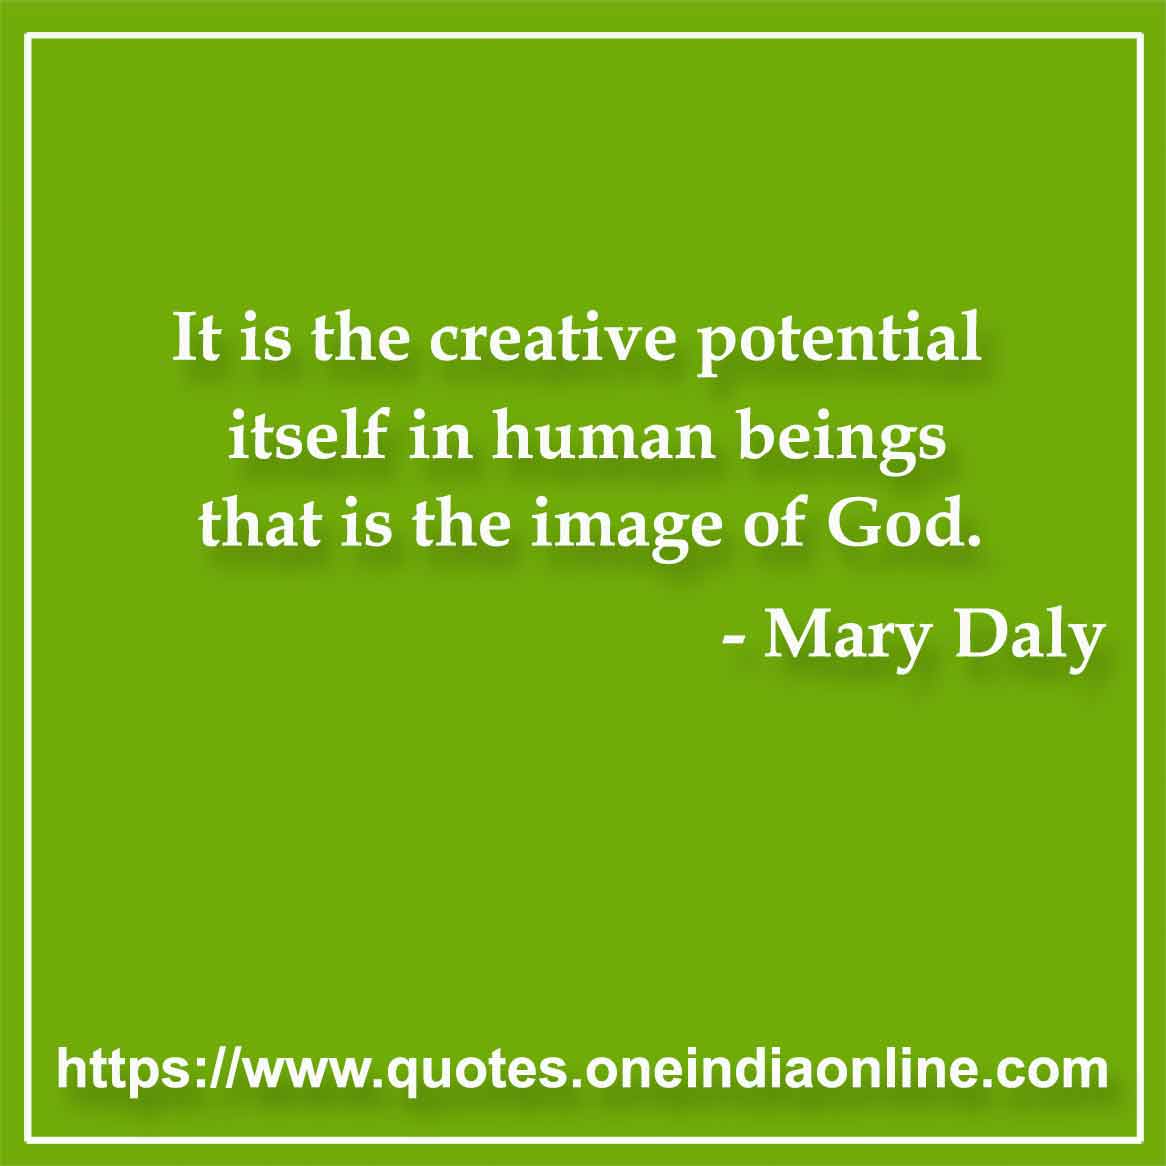 It is the creative potential itself in human beings that is the image of God.

- God Quotes by Mary Daly